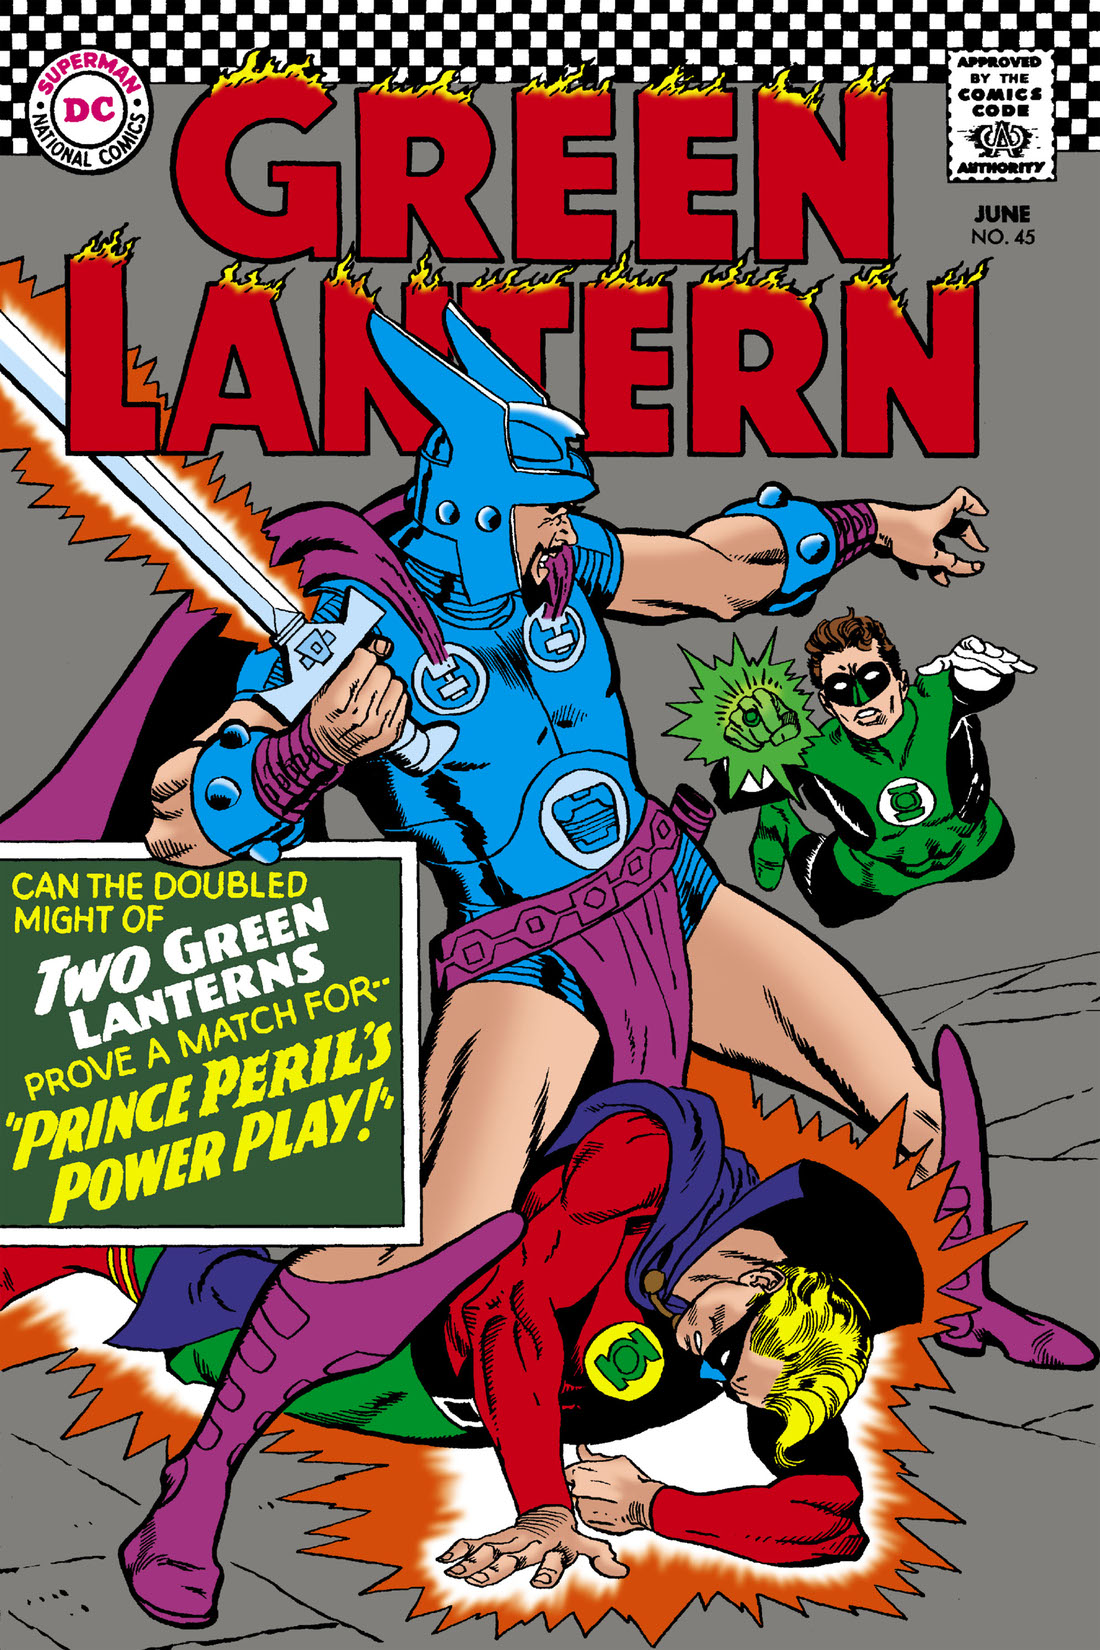 Green Lantern (1960-) #45 preview images